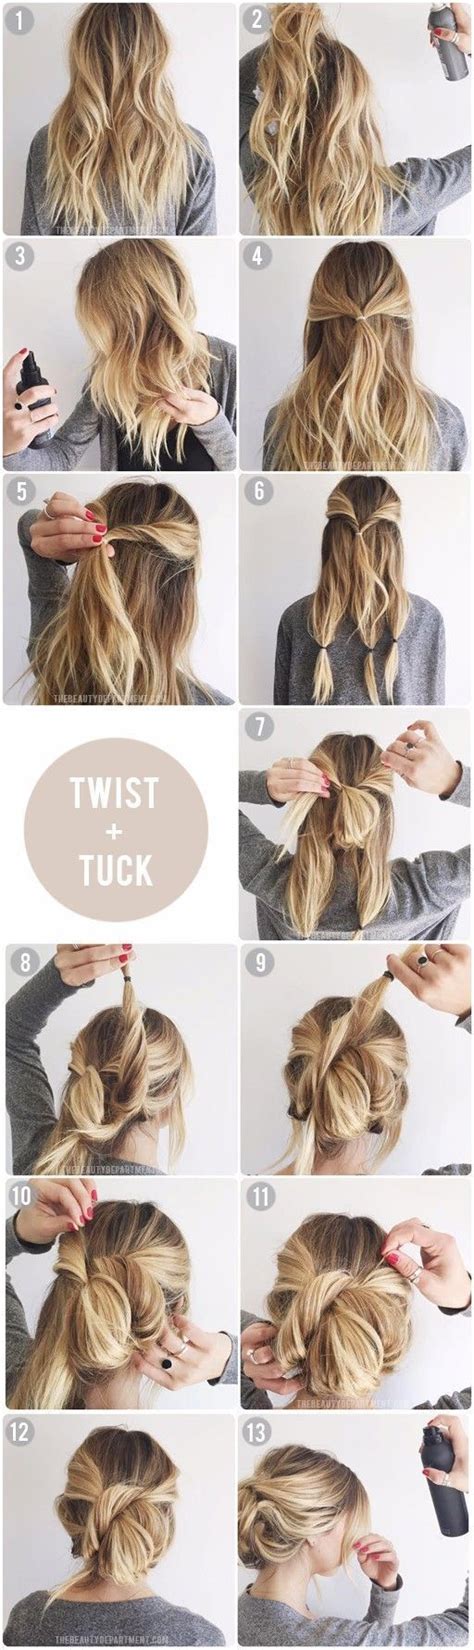 Fresh Ideas To Put Your Hair Up For Bridesmaids